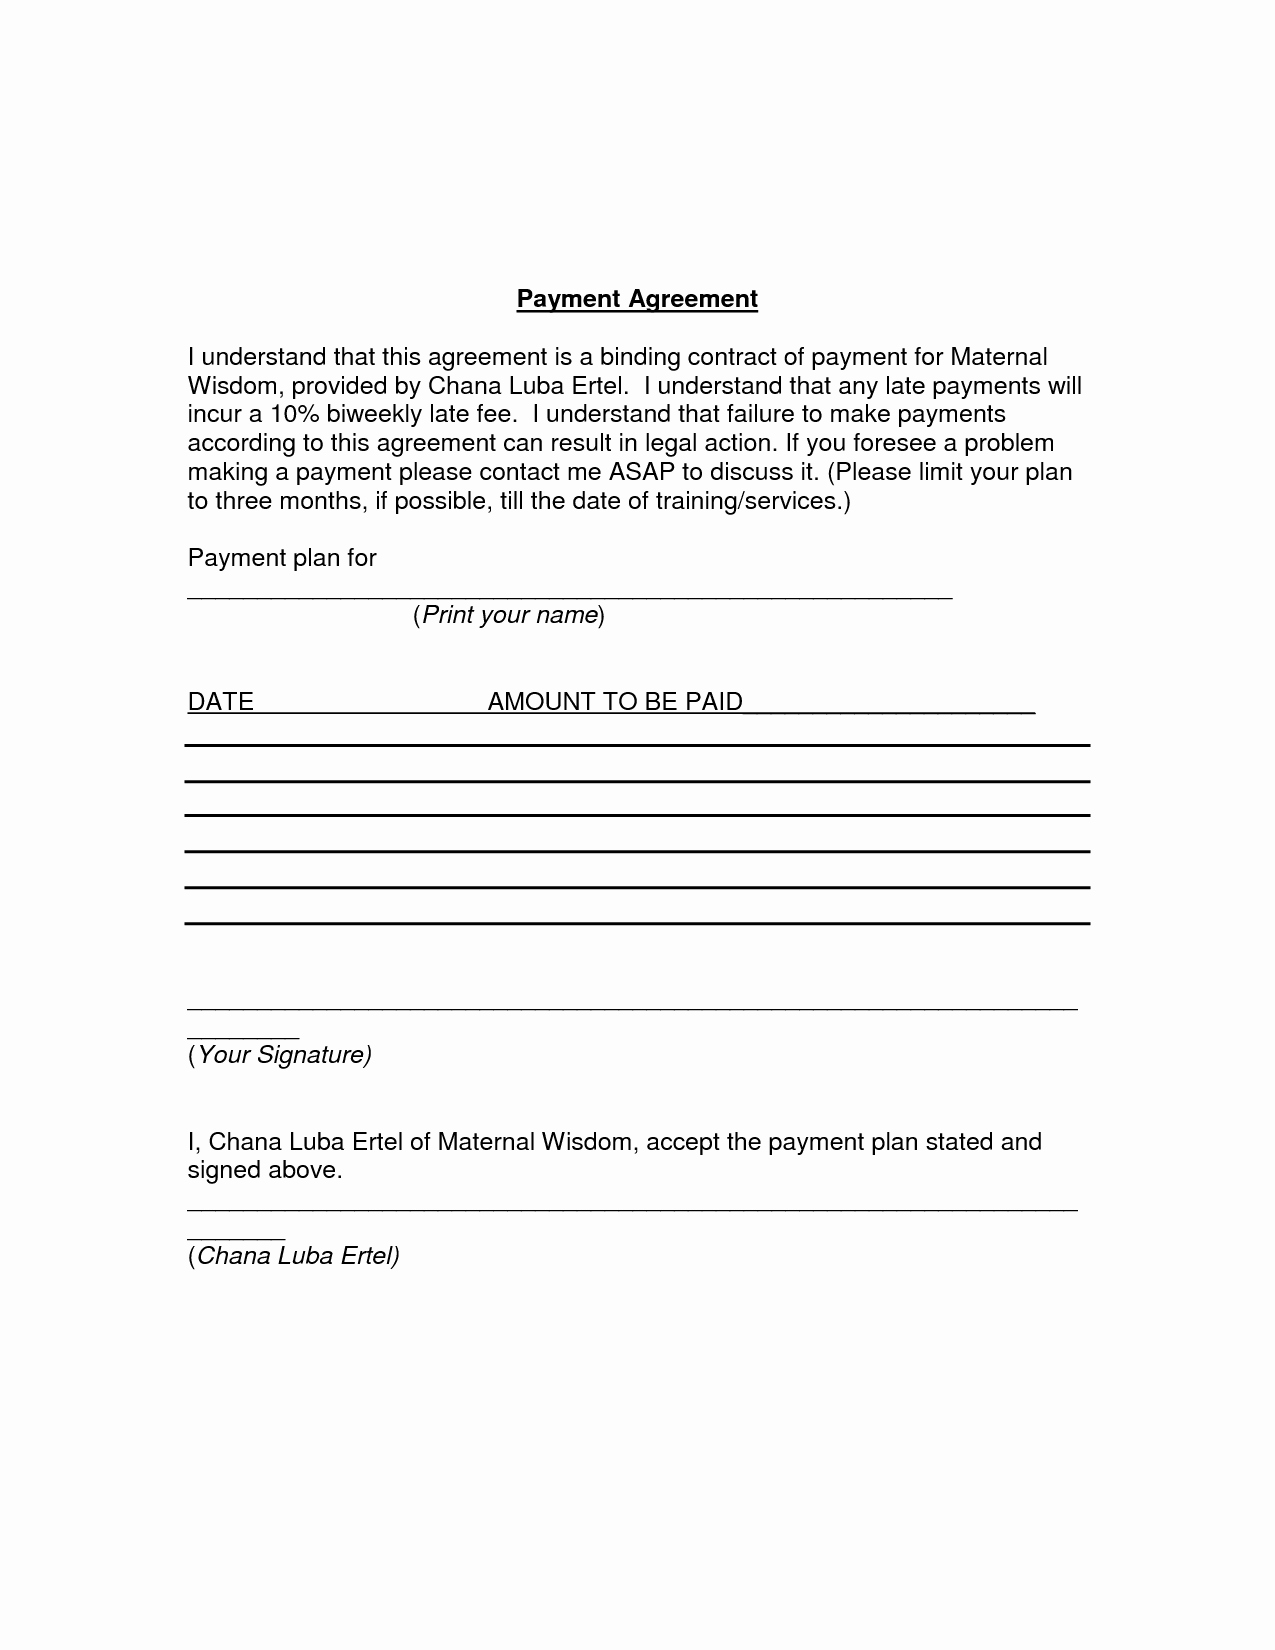 Payment Installment Agreement Template Awesome 5 Payment Agreement Templates Word Excel Pdf formats